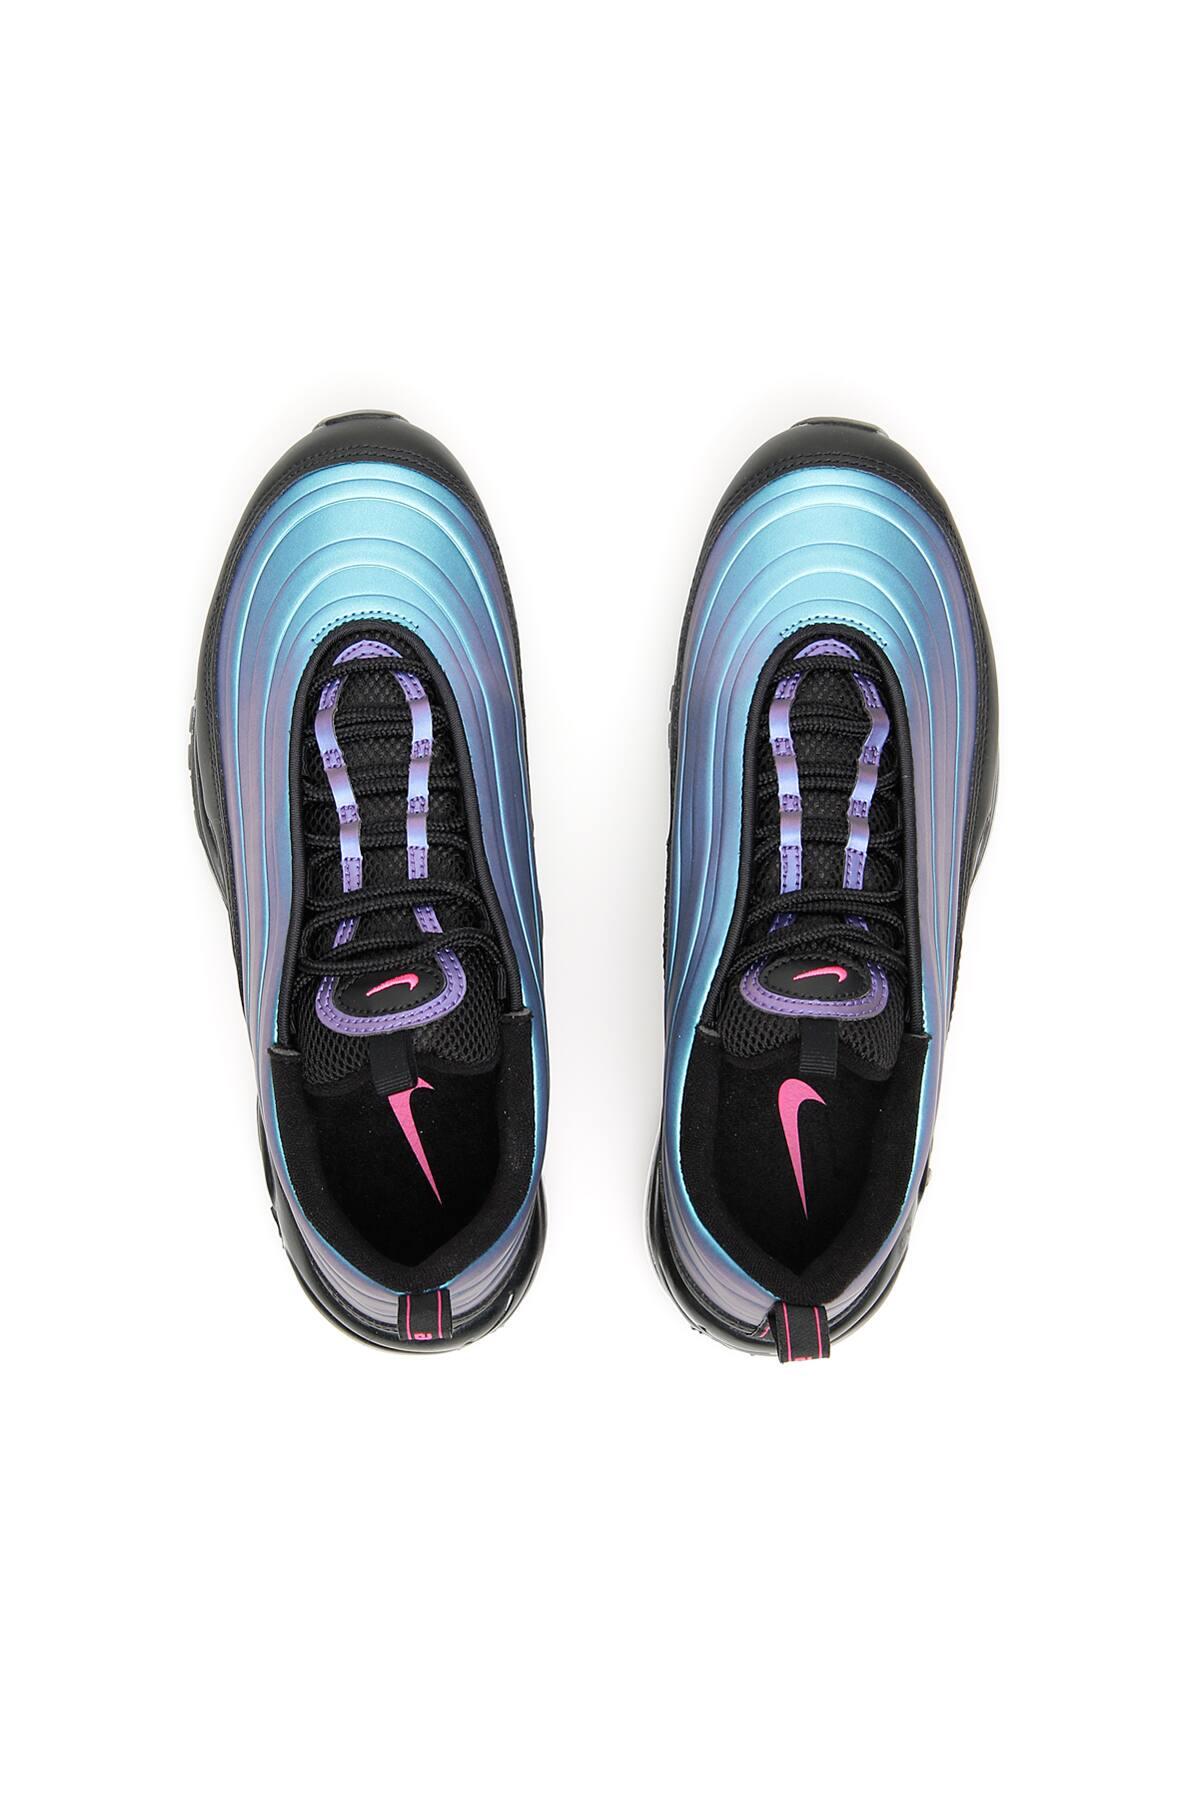 Nike Air Max 97 Lx Sneakers in Black,Purple,Light Blue (Blue) for Men | Lyst